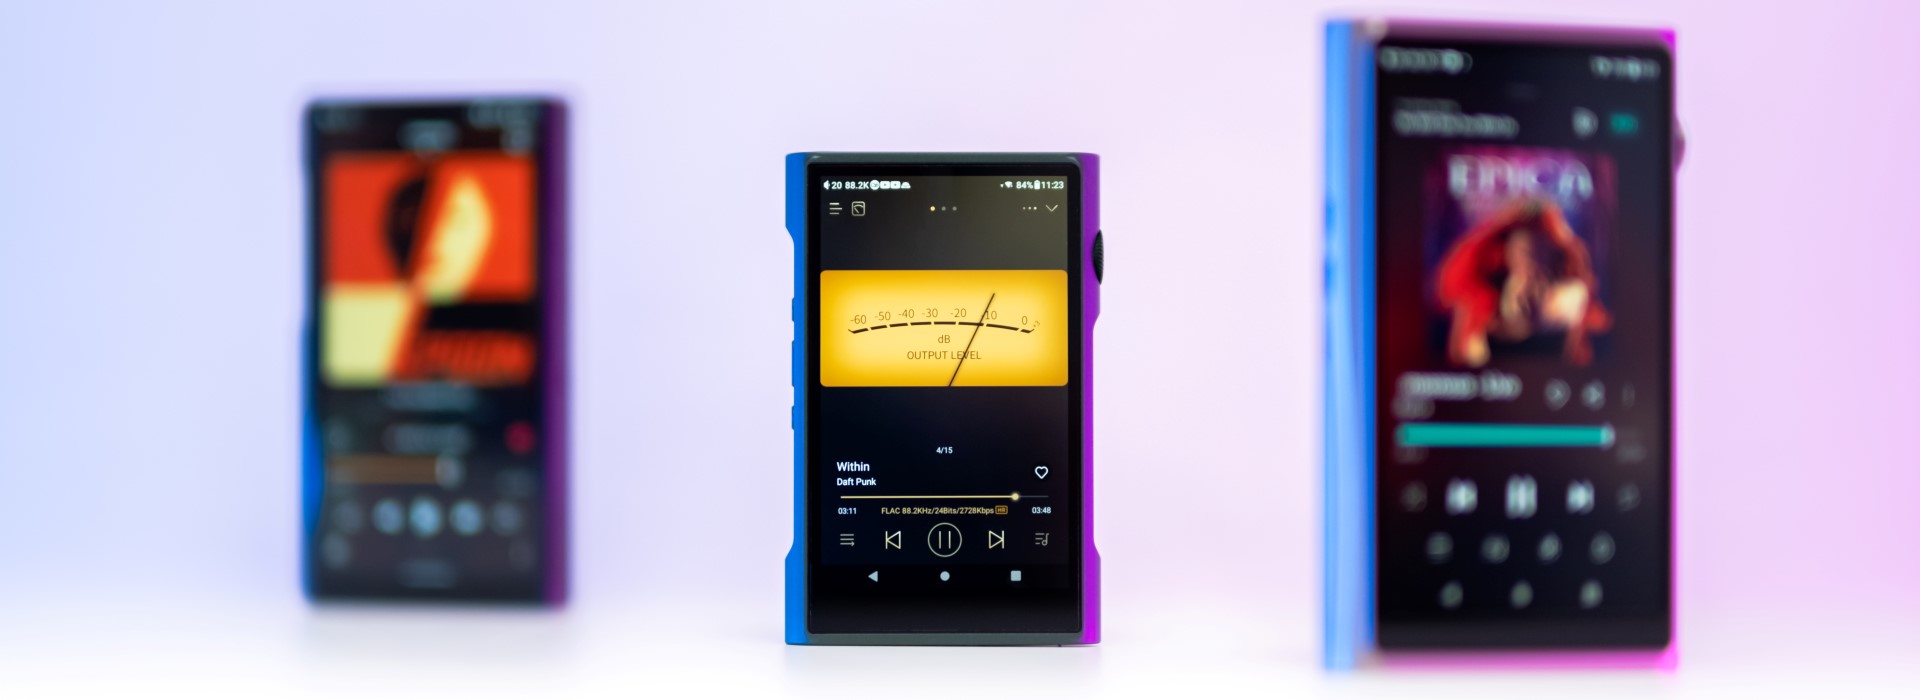 Shanling M3 Ultra DAP Review - Small Size, Mean Attitude - Soundnews